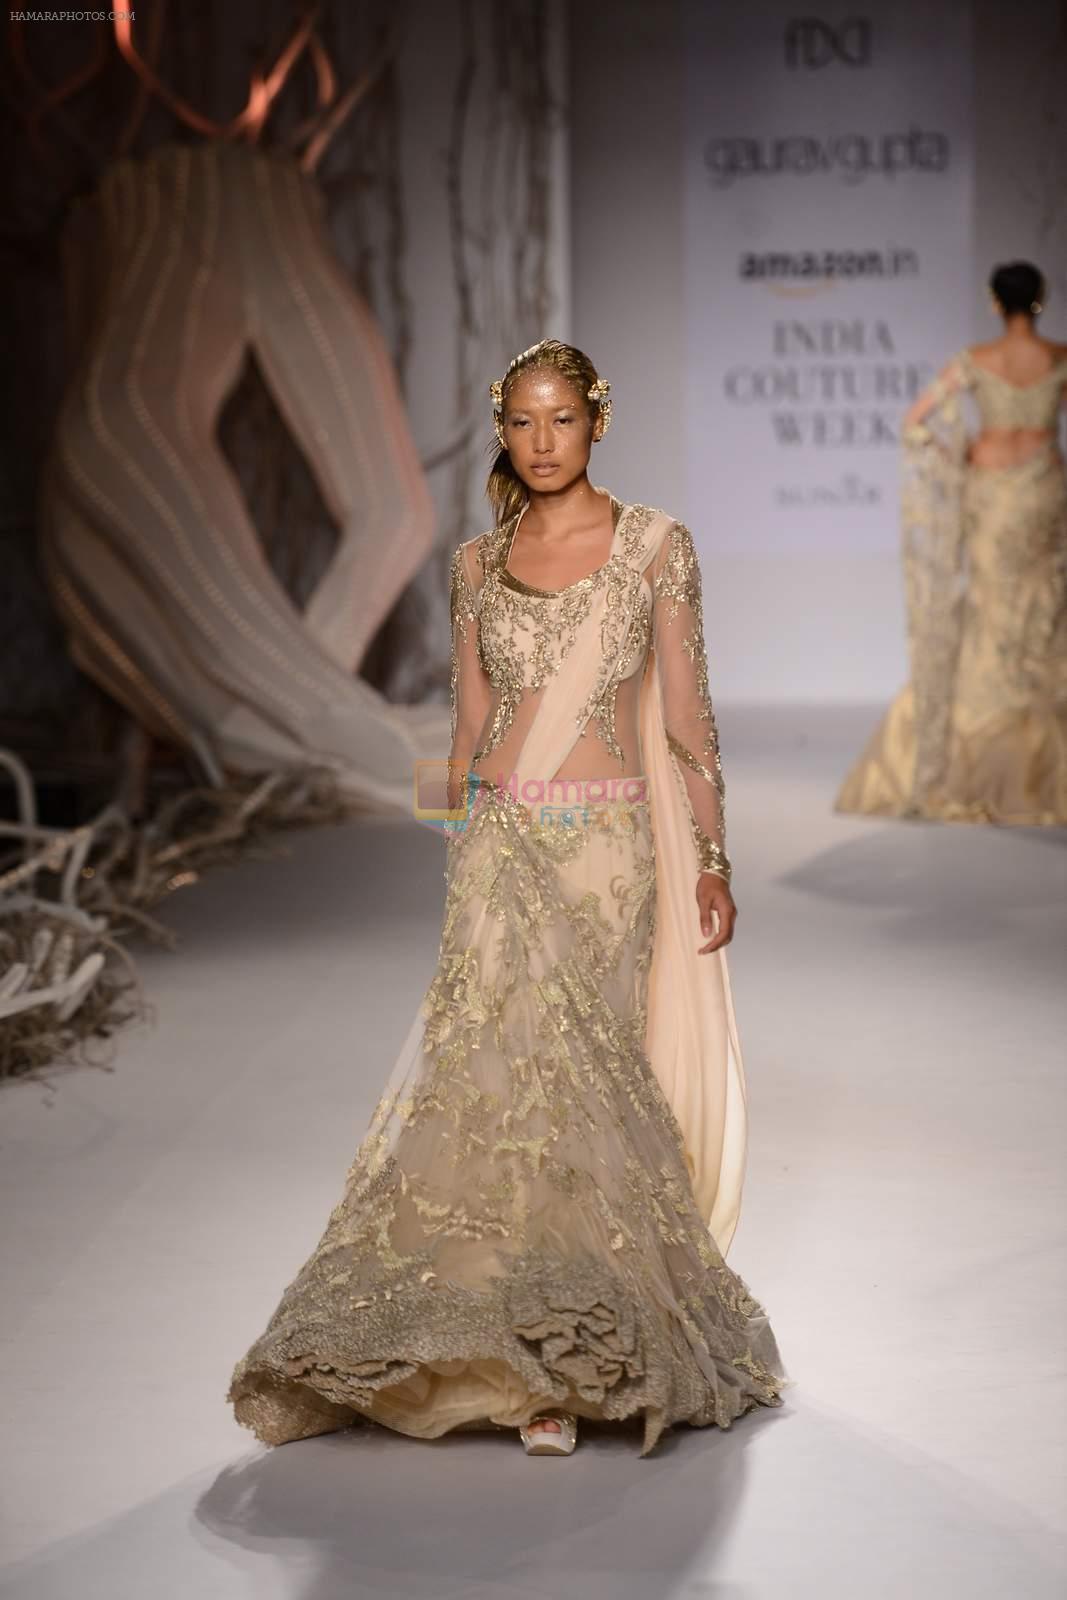 Model walks for Gaurav Gupta at India Couture week day 2 on 30th July 2015